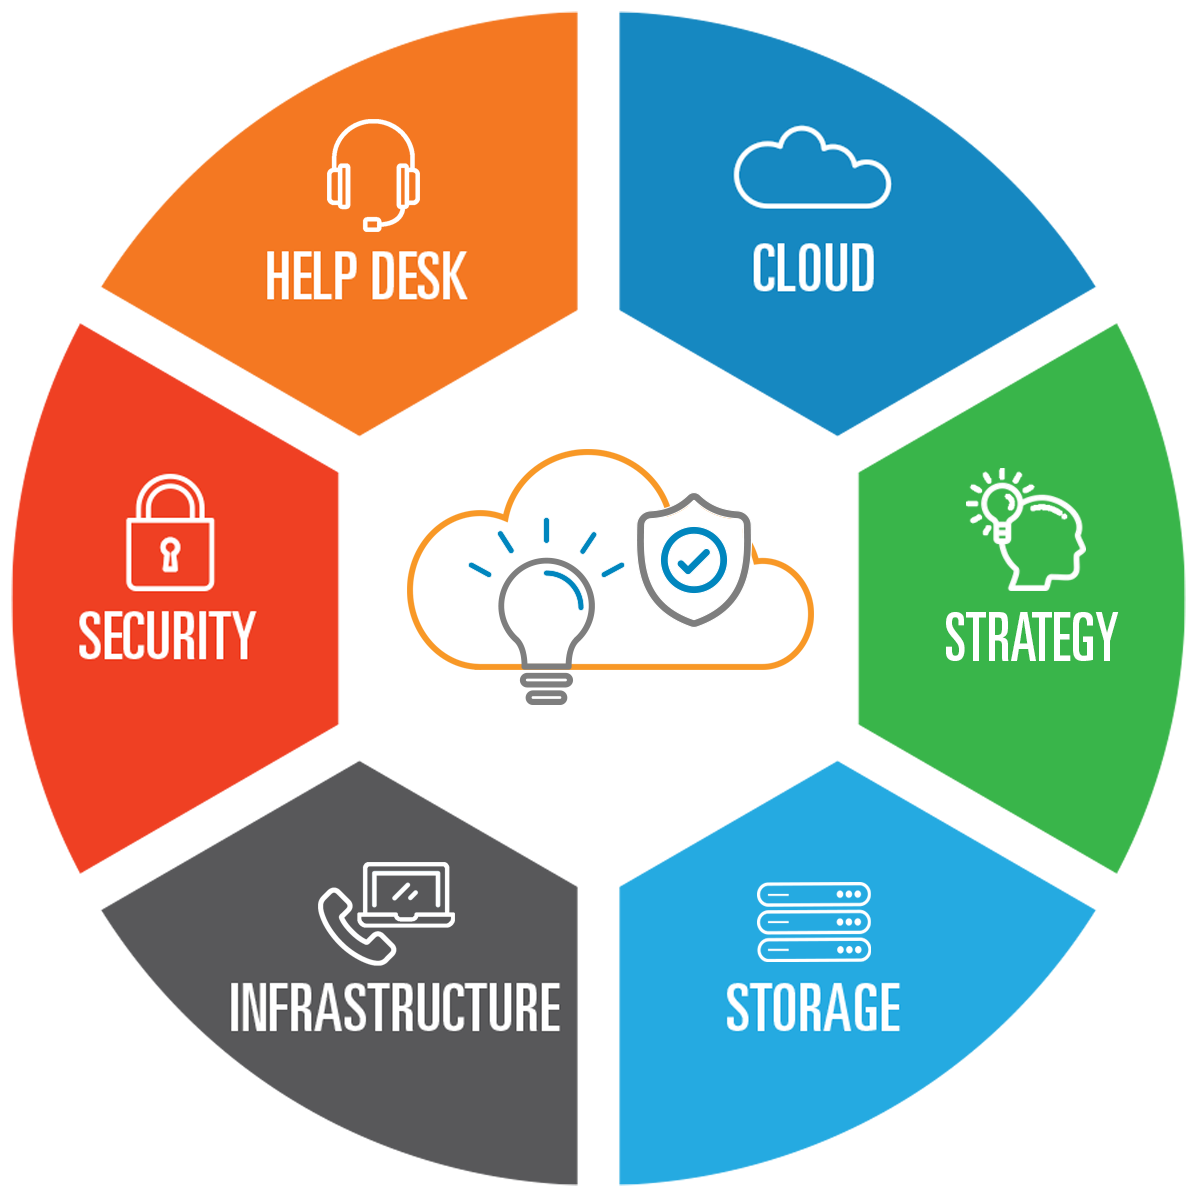 Grid4 Managed IT Services provide cloud, strategy, storage, infrastructure, security for all your IT needs